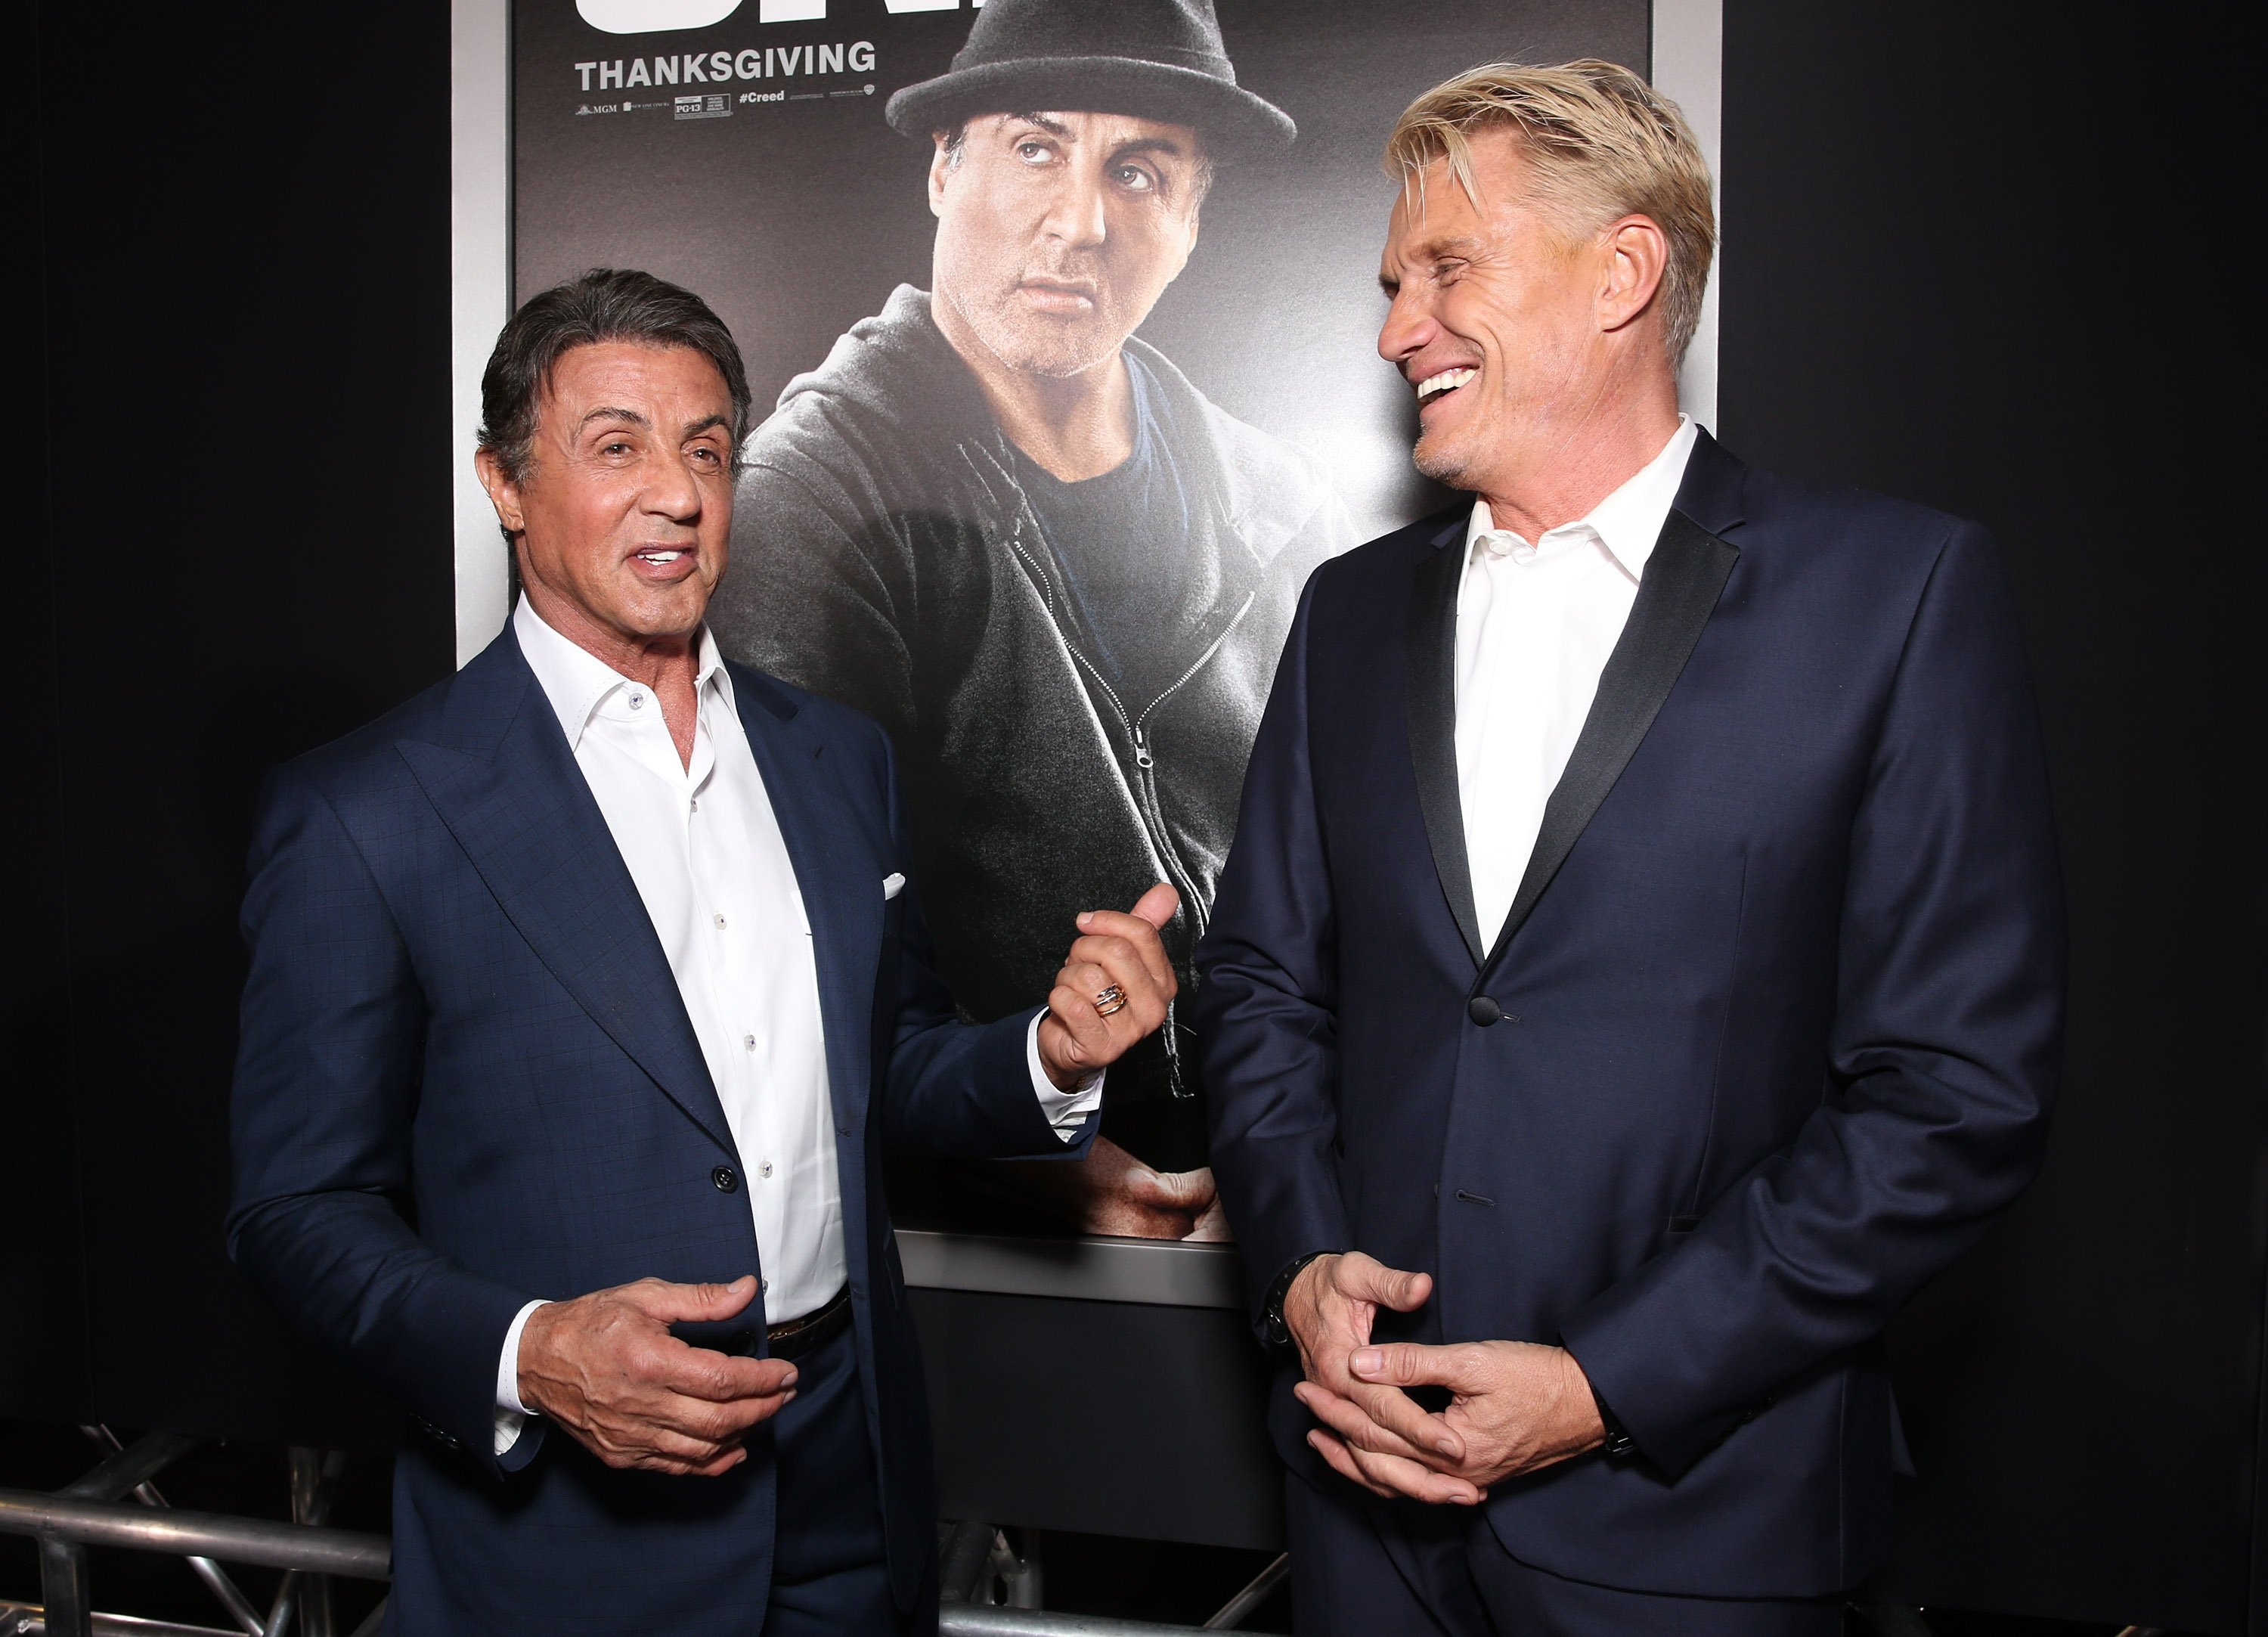 Rocky actor Sylvester Stallone and Dolph Lundgren attend the premiere of Creed